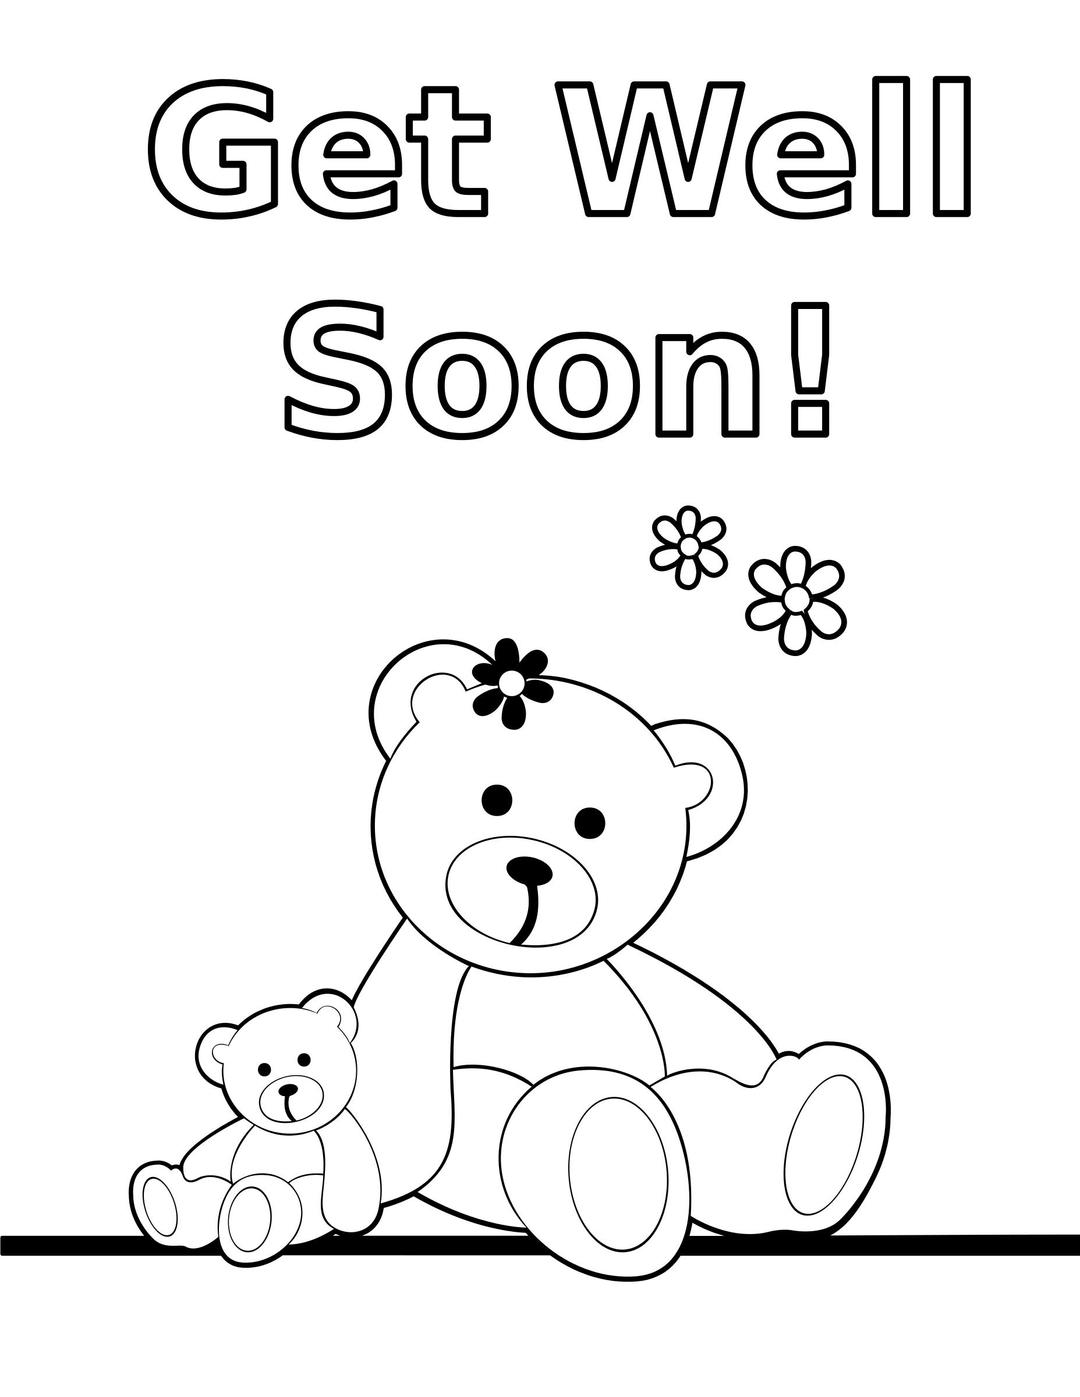 Coloring "get well soon" teddy bear card png transparent